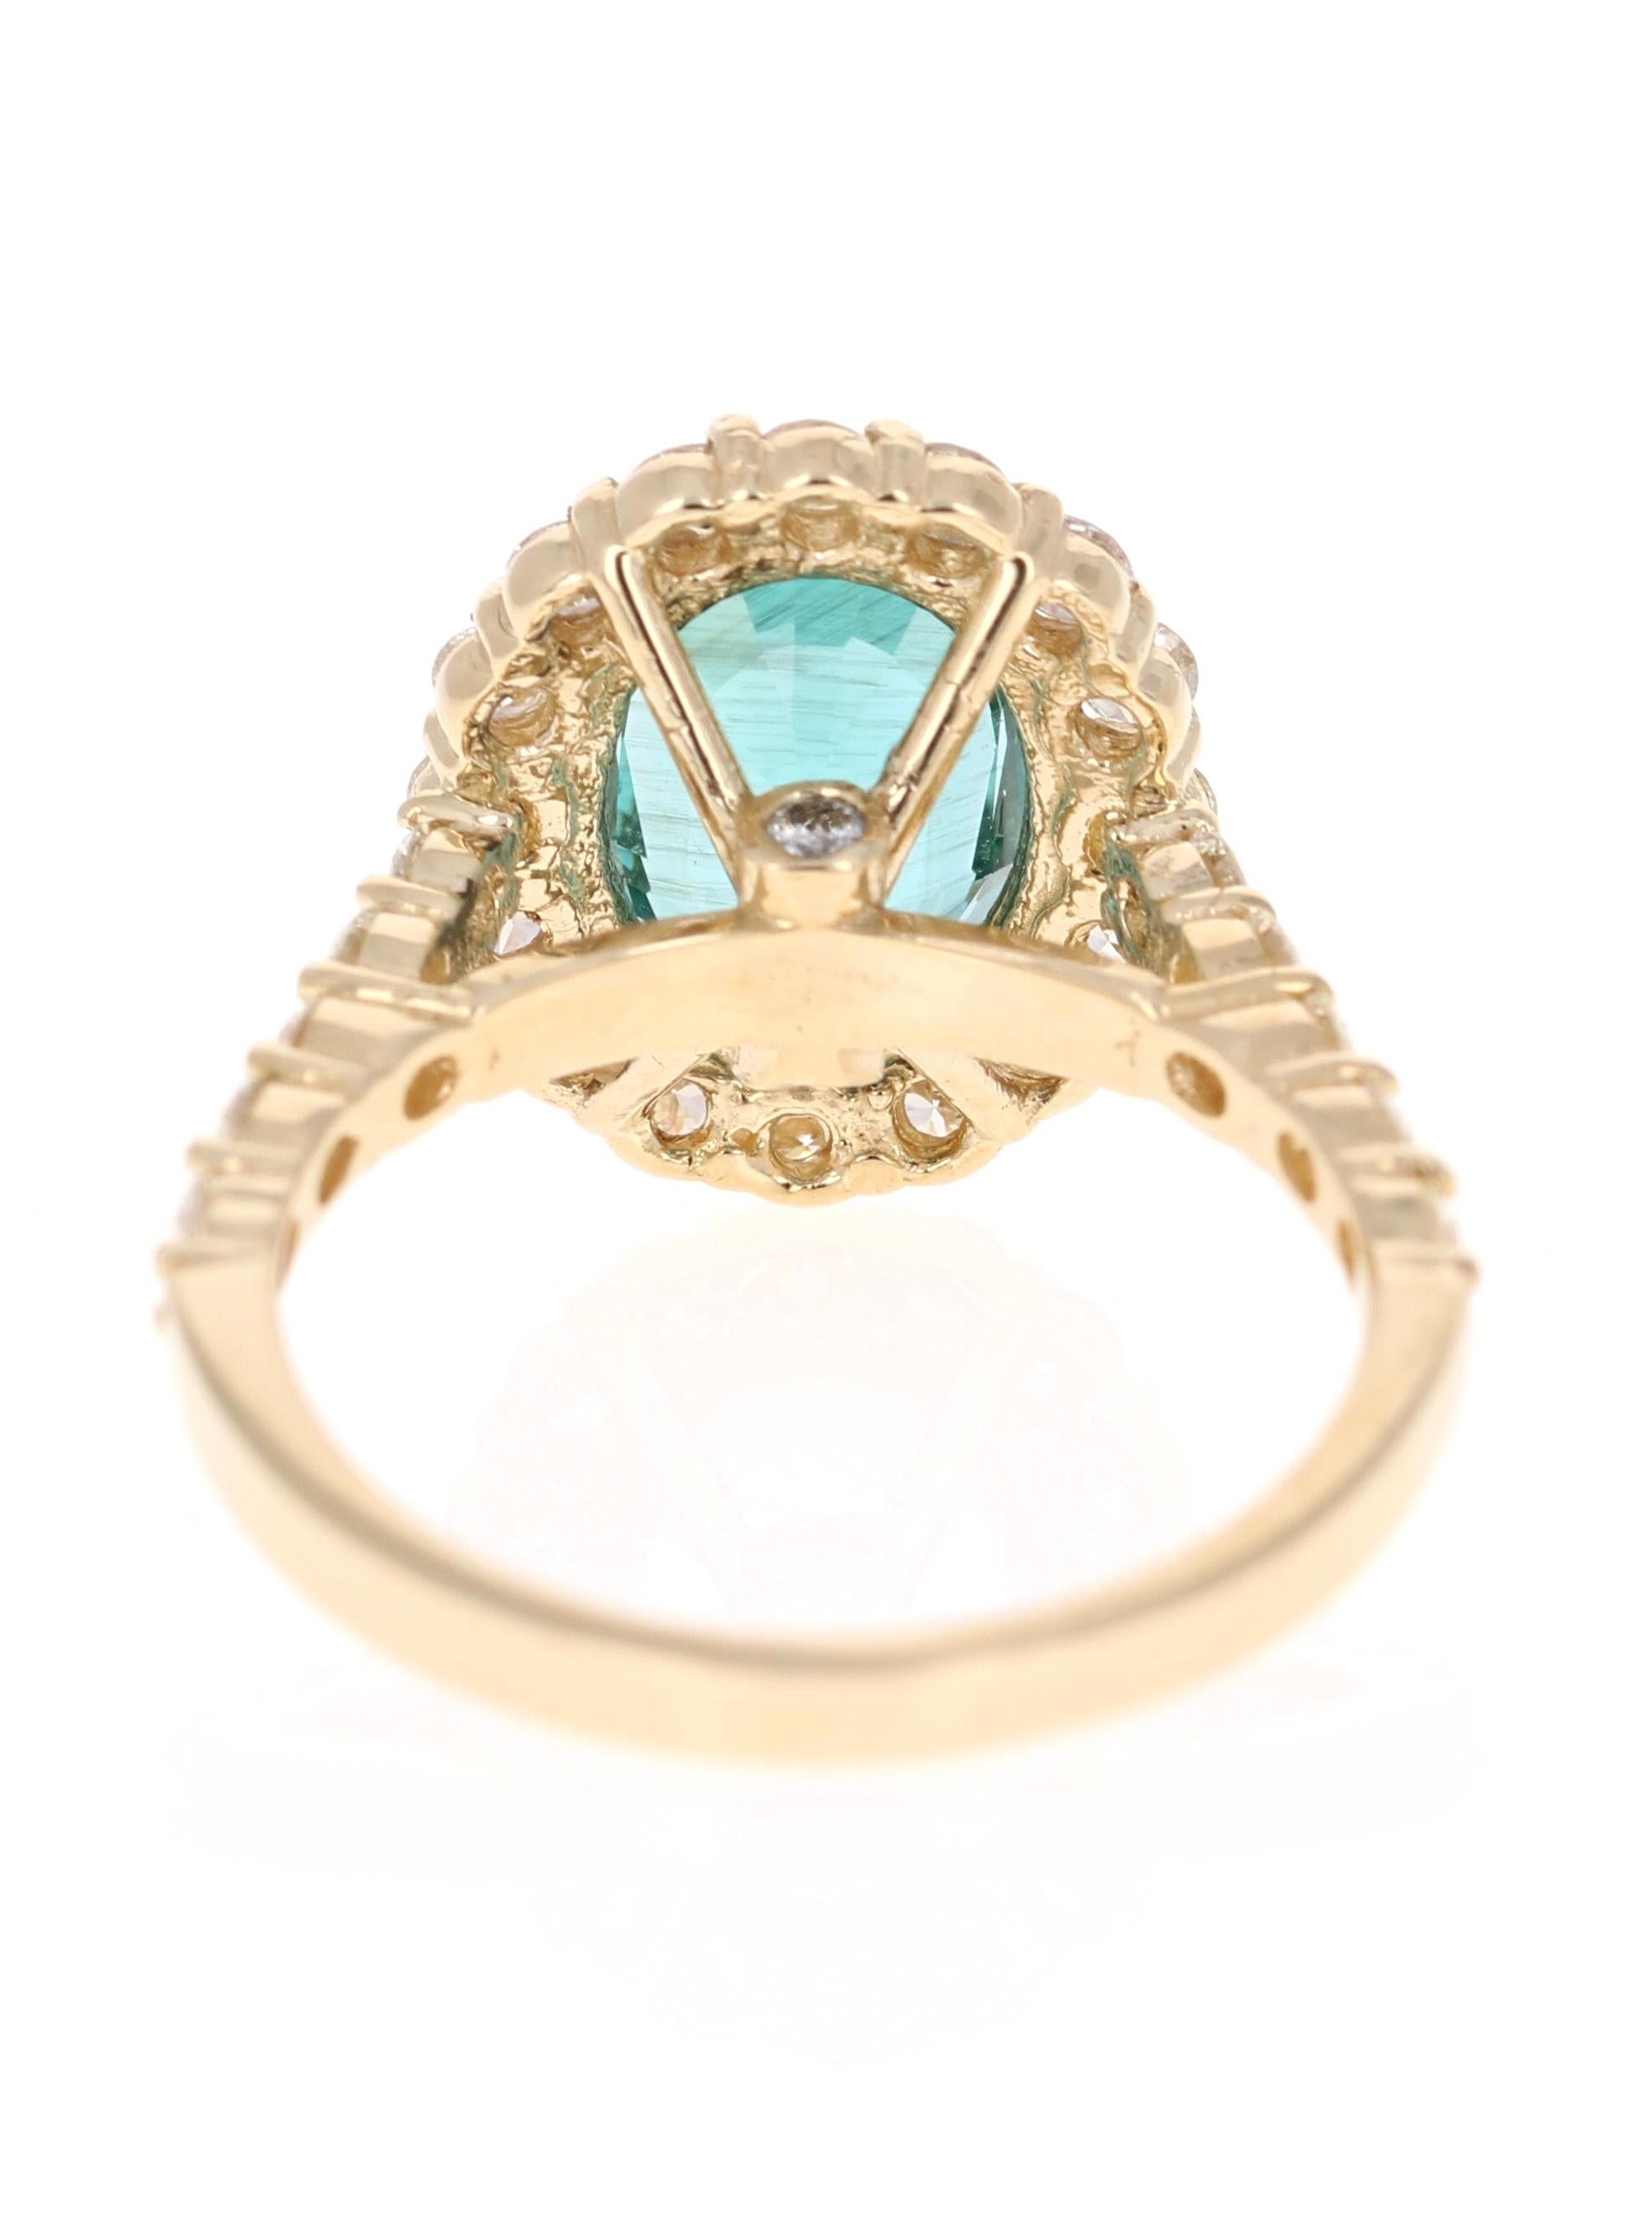 Oval Cut 3.96 Carat Apatite Diamond Yellow Gold Ring For Sale